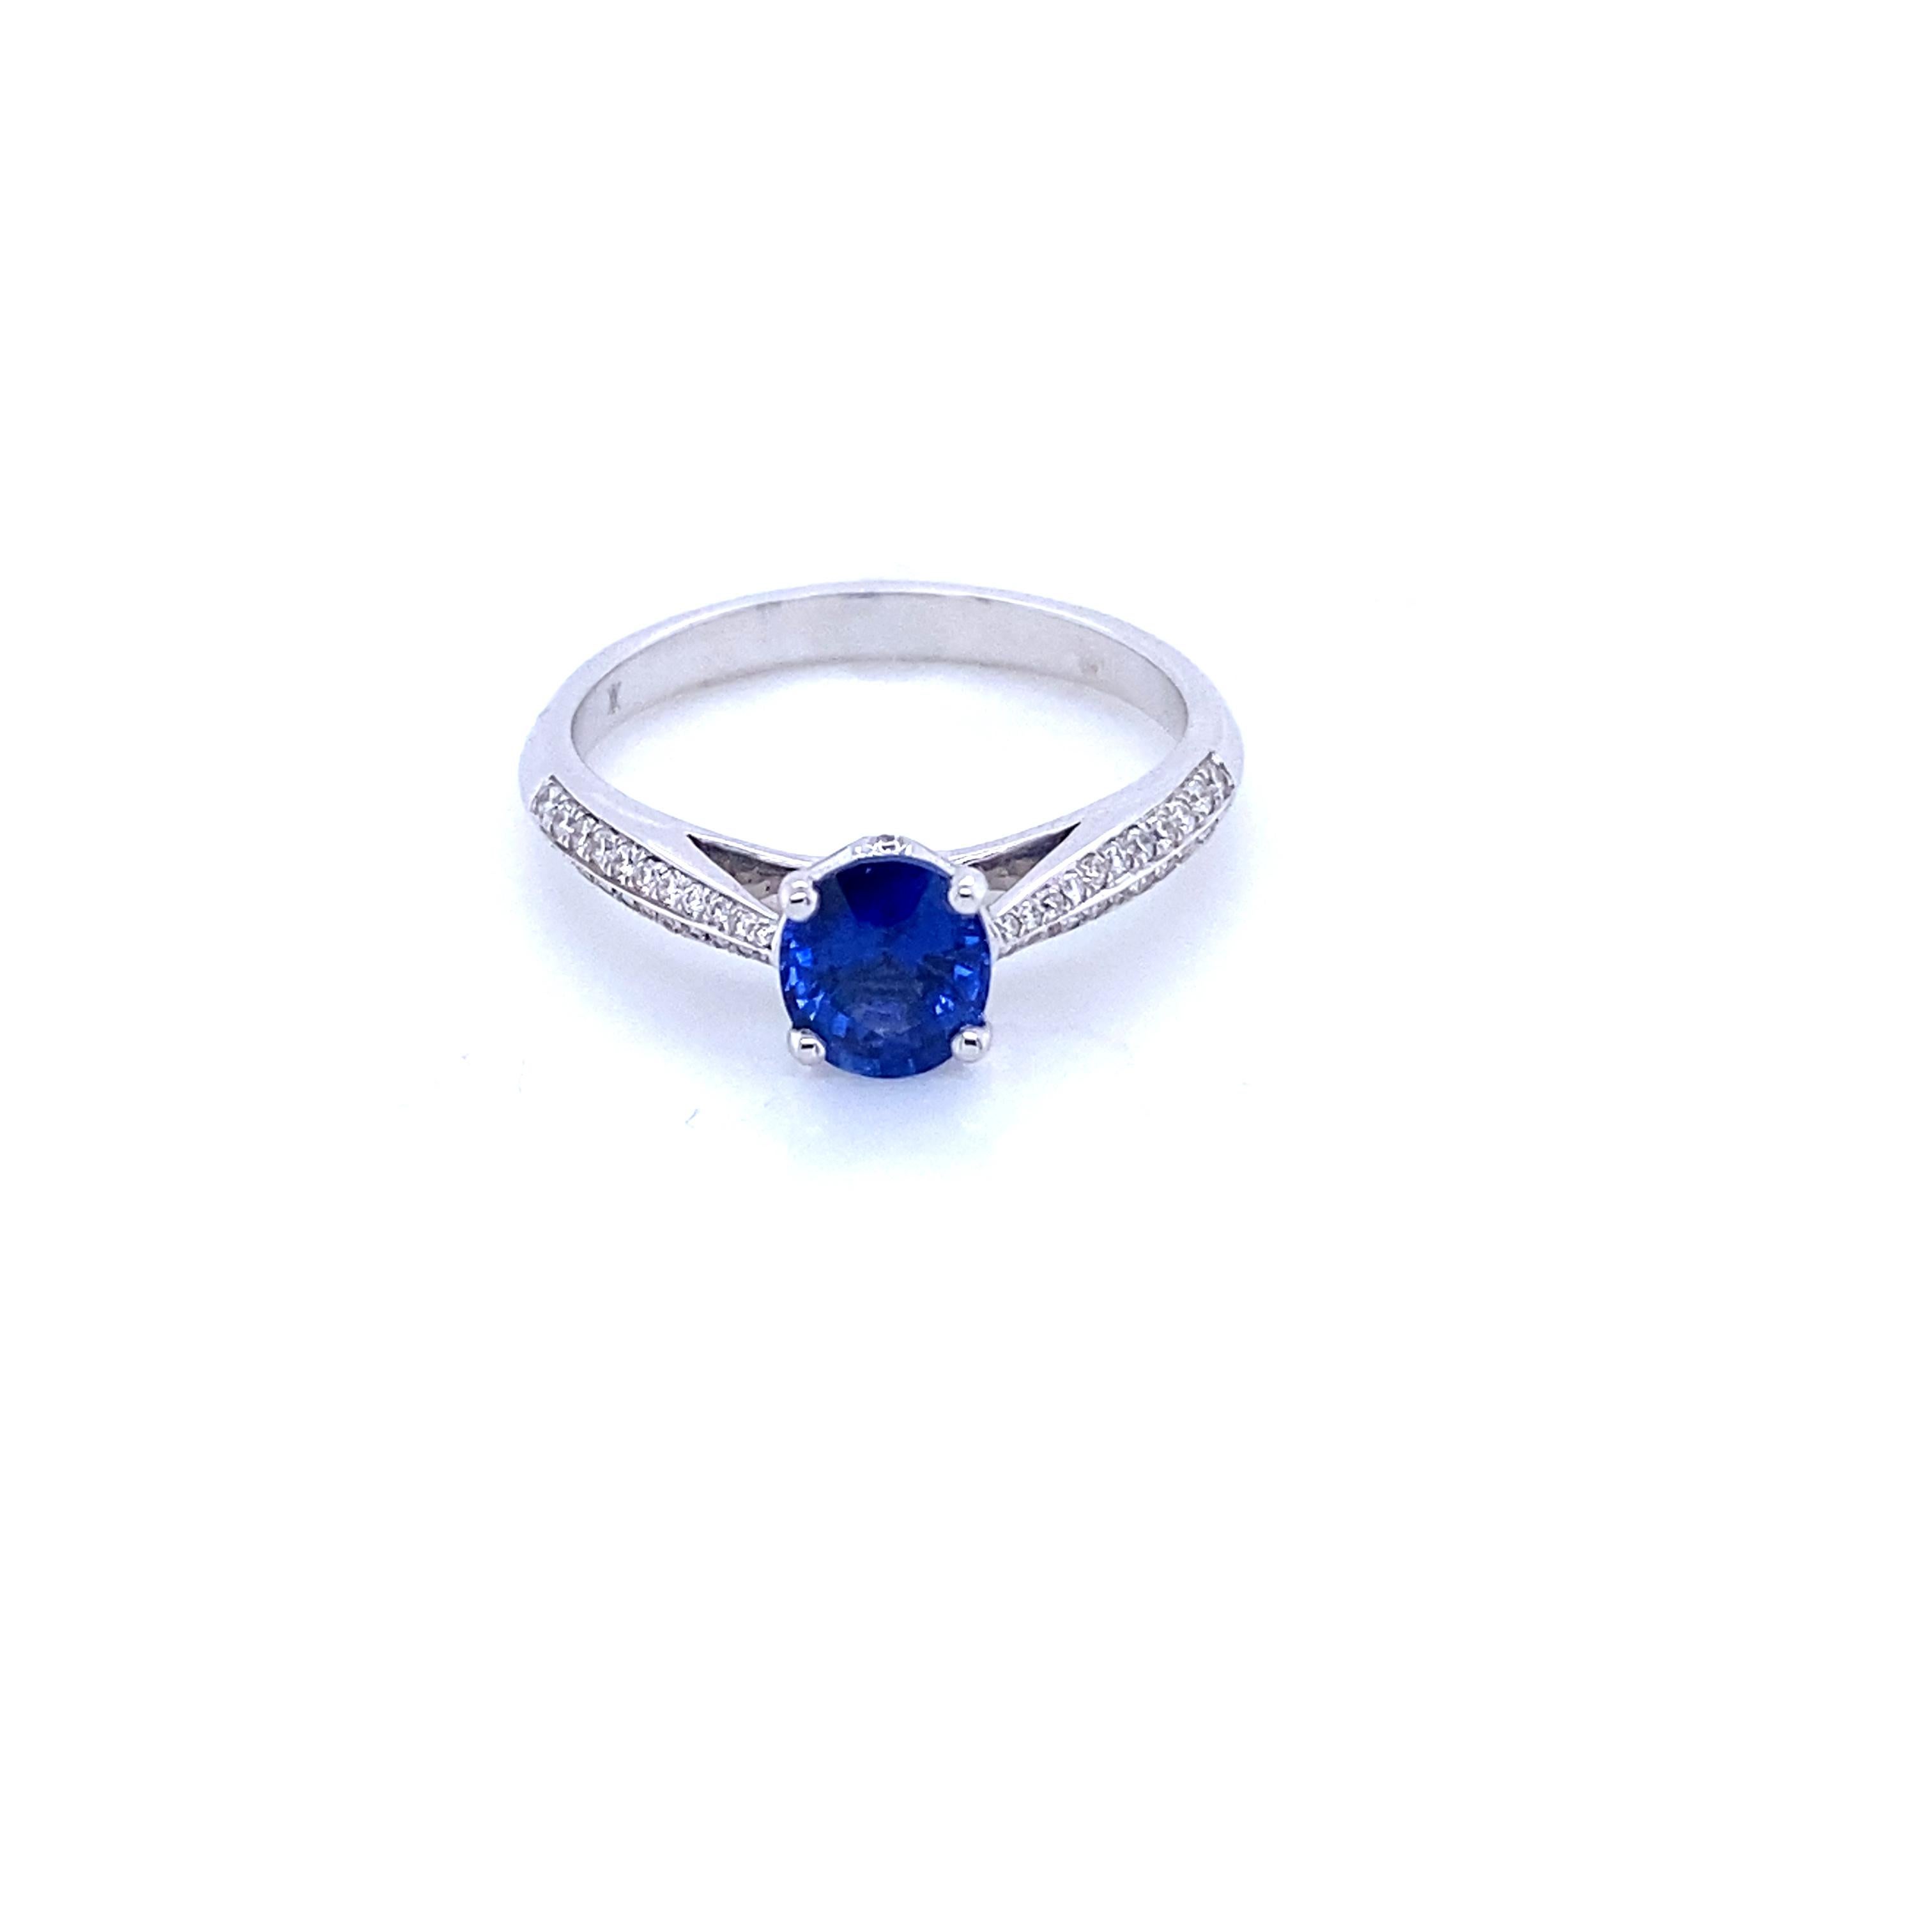 Engagement Ring in White Gold with Blue Sapphire and Diamonds
French Collection by Mesure et Art du Temps

Magnificent Engagement ring in 18 Carat white gold surmounted by a blue sapphire, oval shape which weighs 1.07 Carat. This ring is accompanied